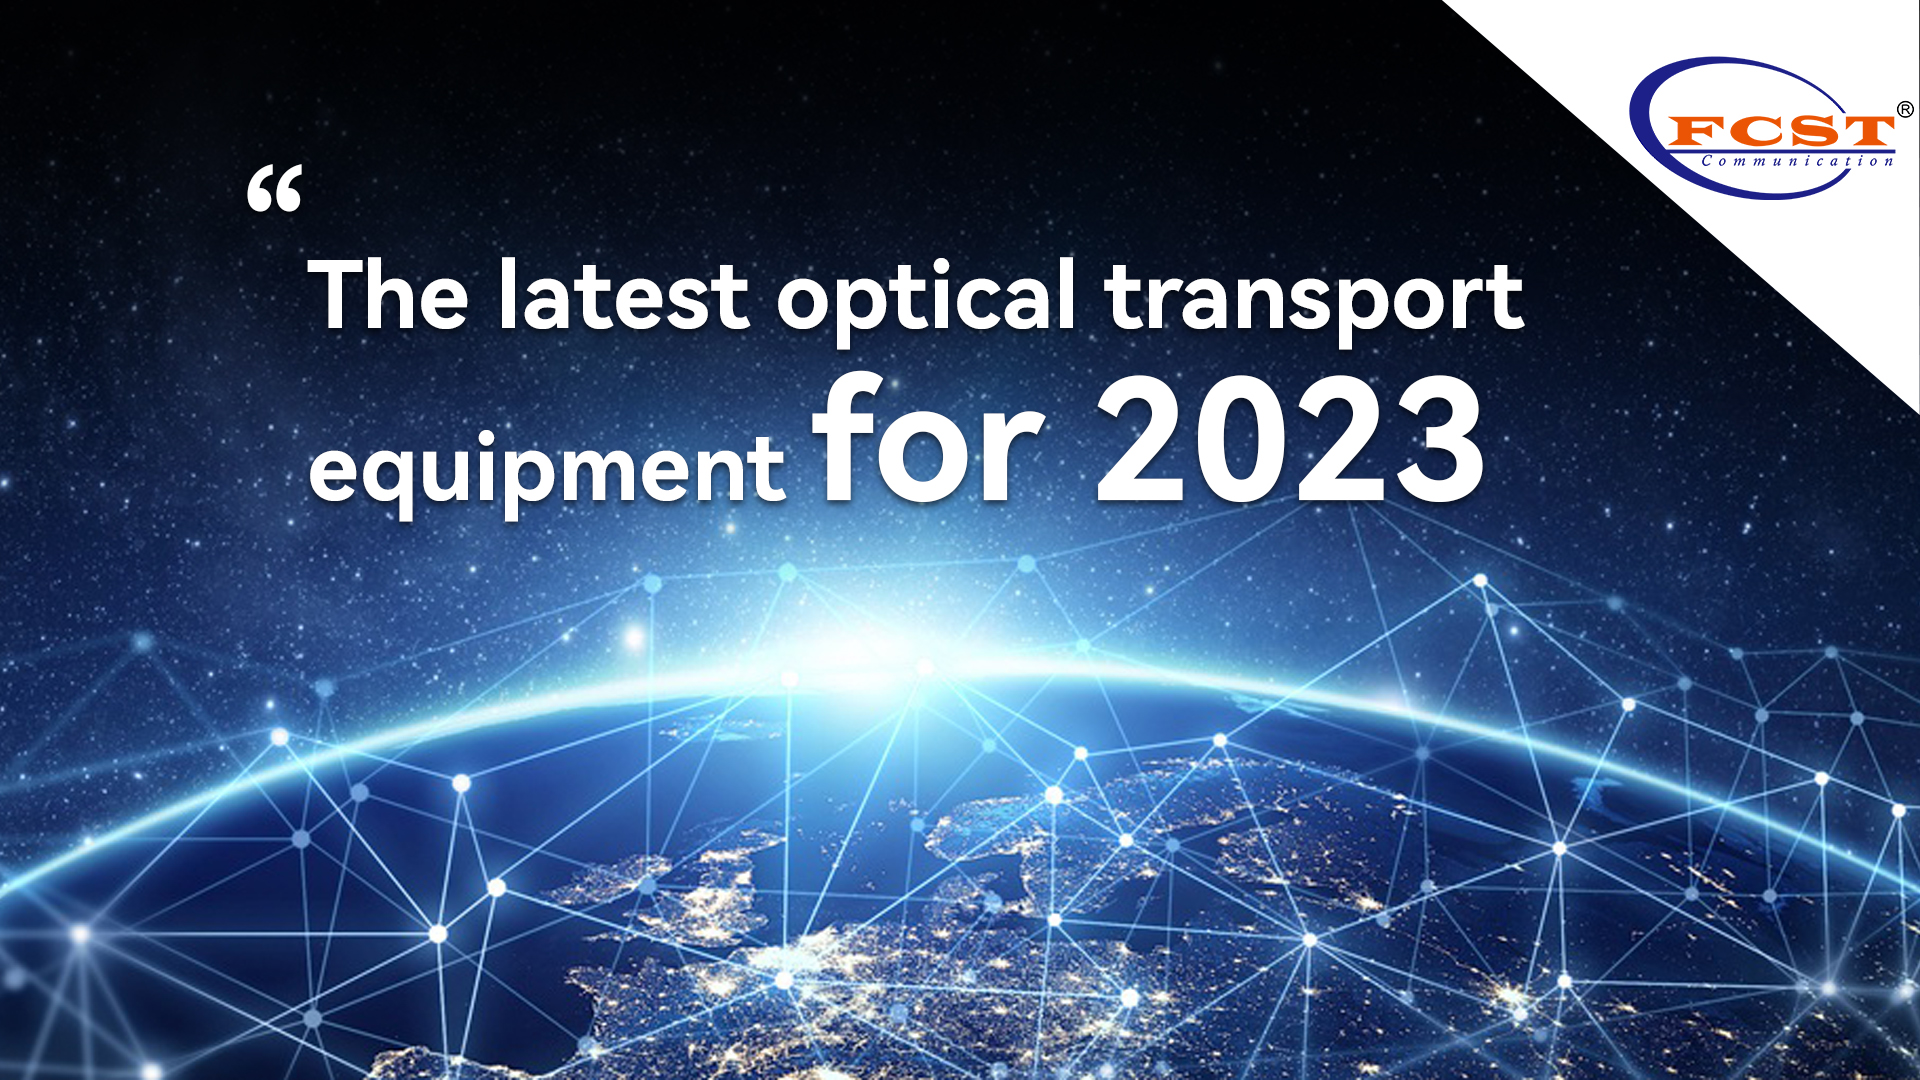 The latest optical transport equipment for 2023